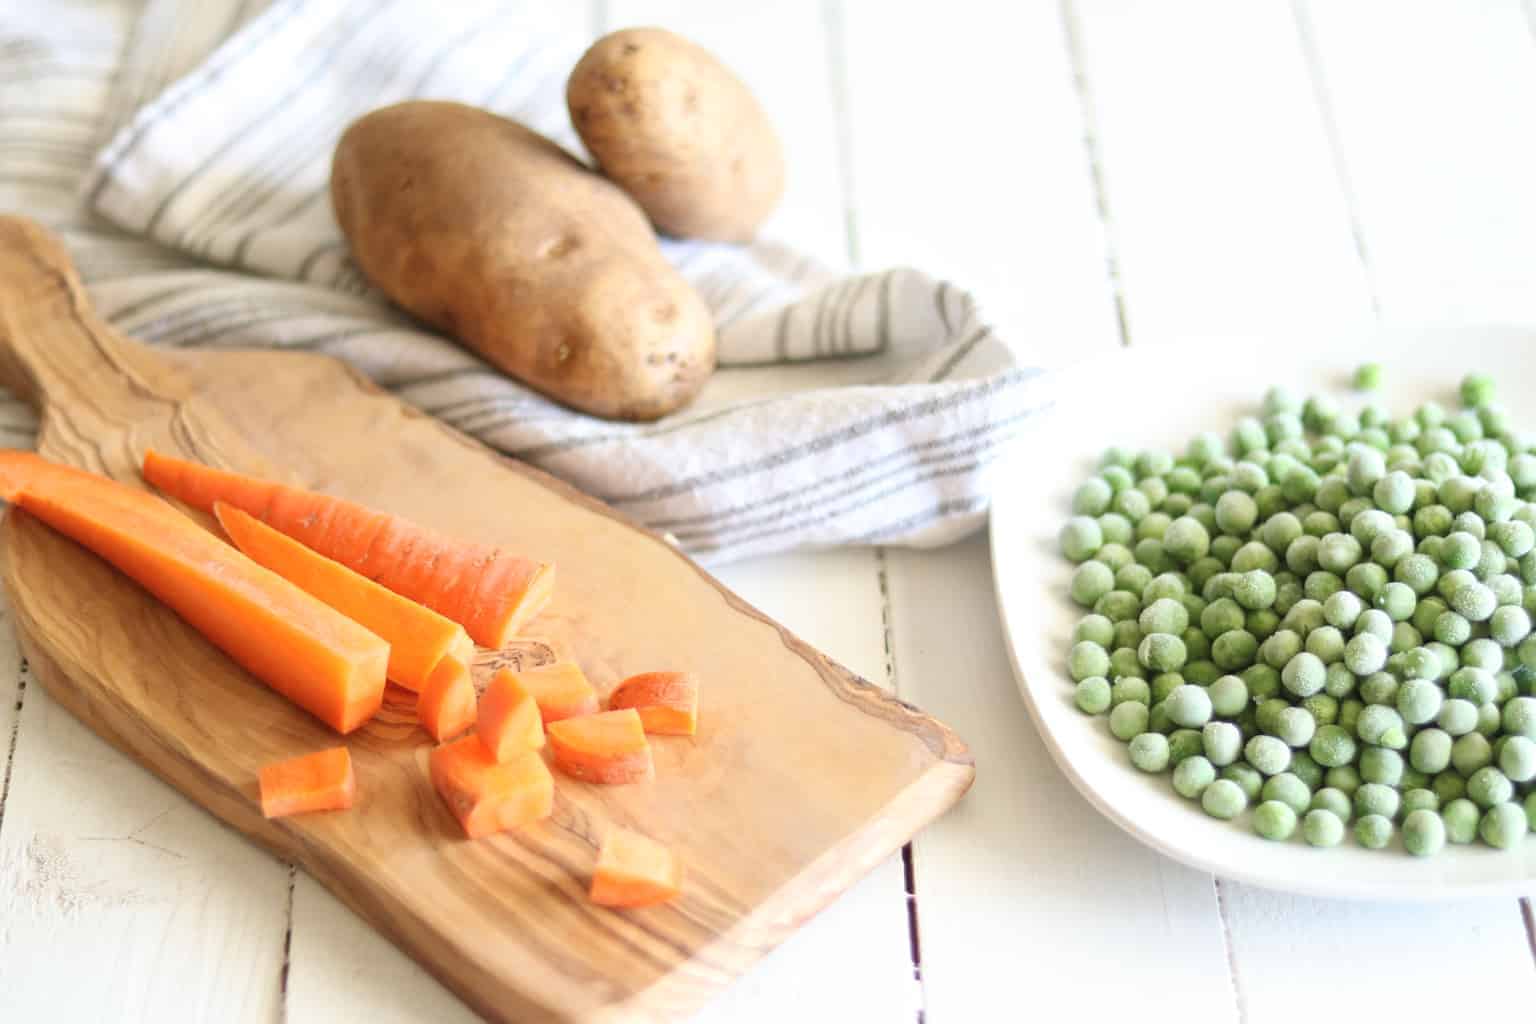 Chopped carrots on wooden cutting board, frozen peas on white plate, and potatoes.